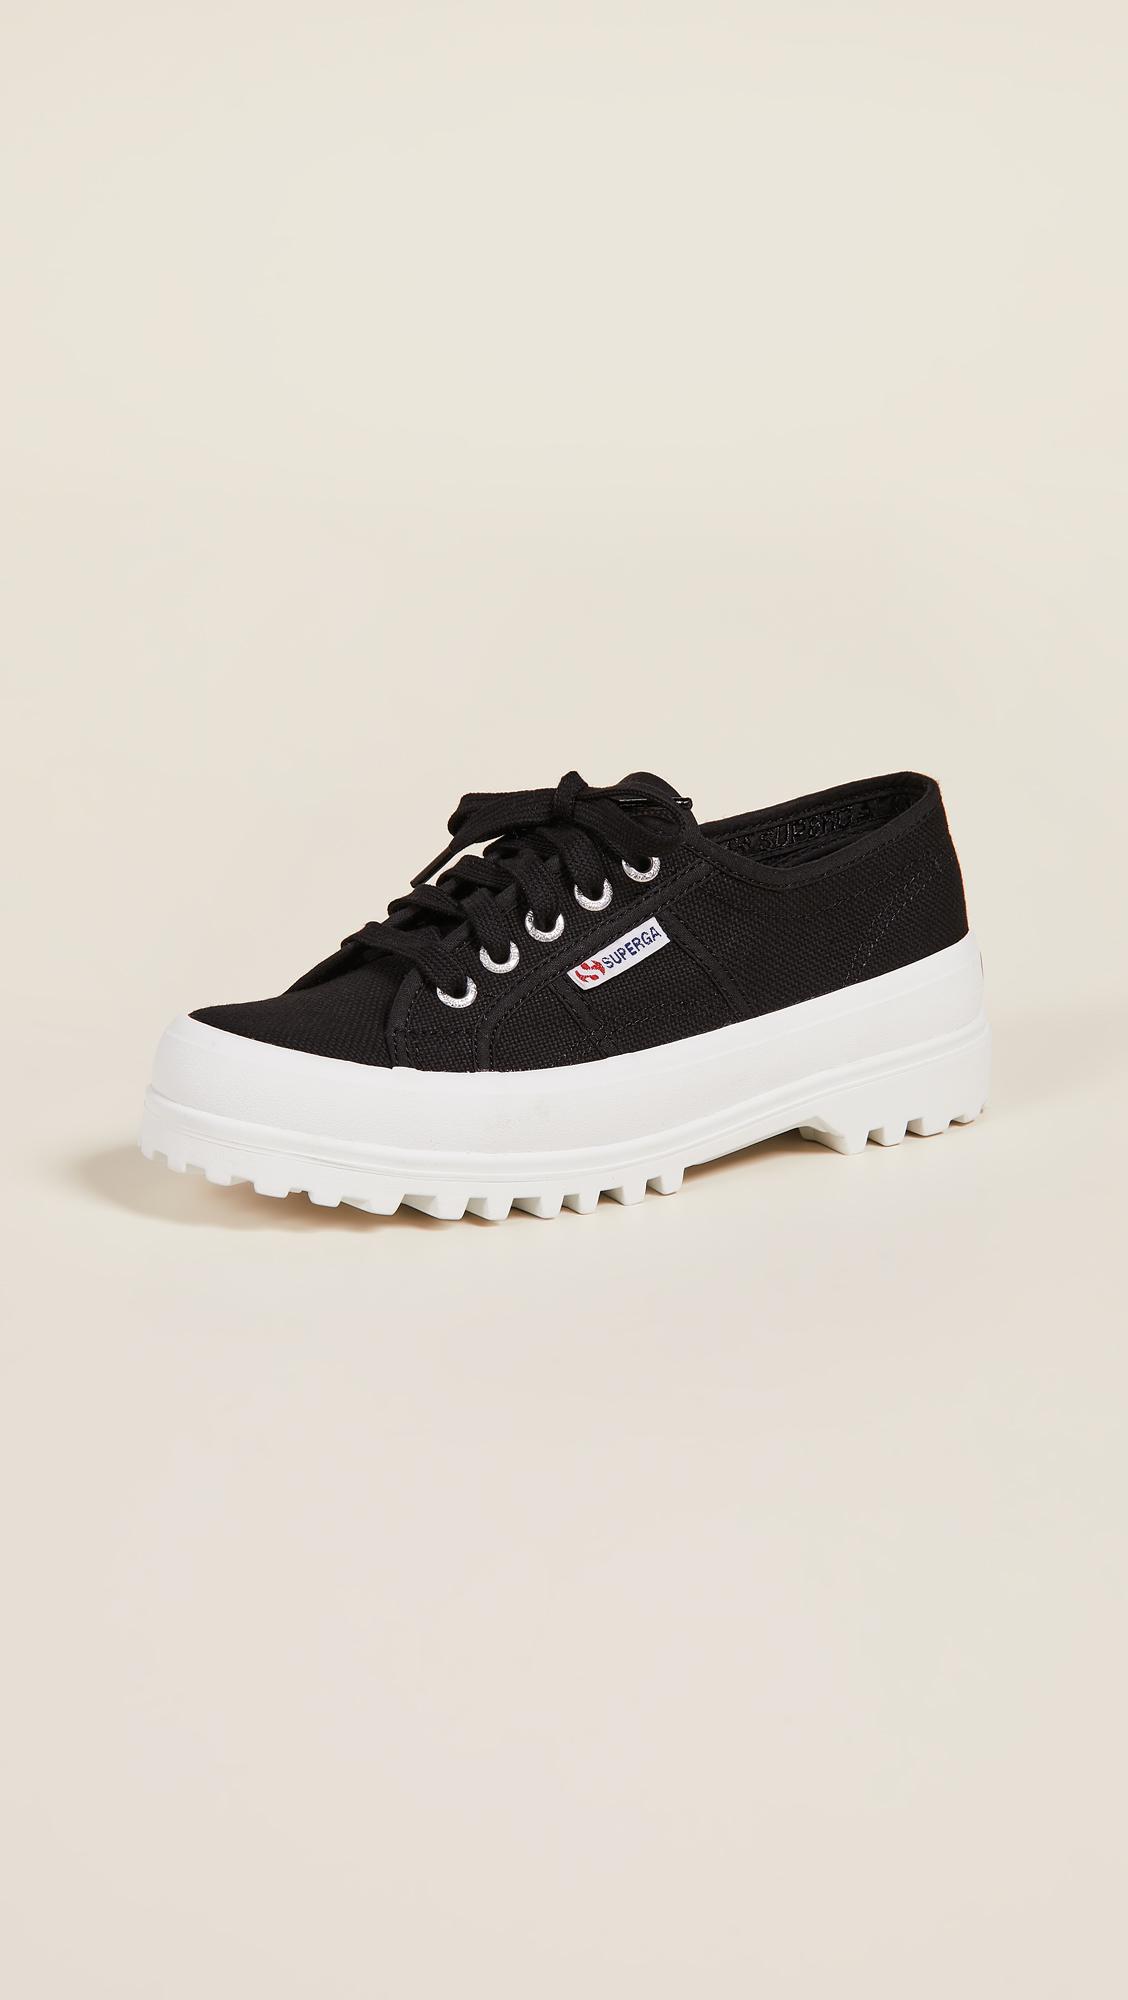 Buy Superga Sneakers & Casual shoes online - 53 products | FASHIOLA.in